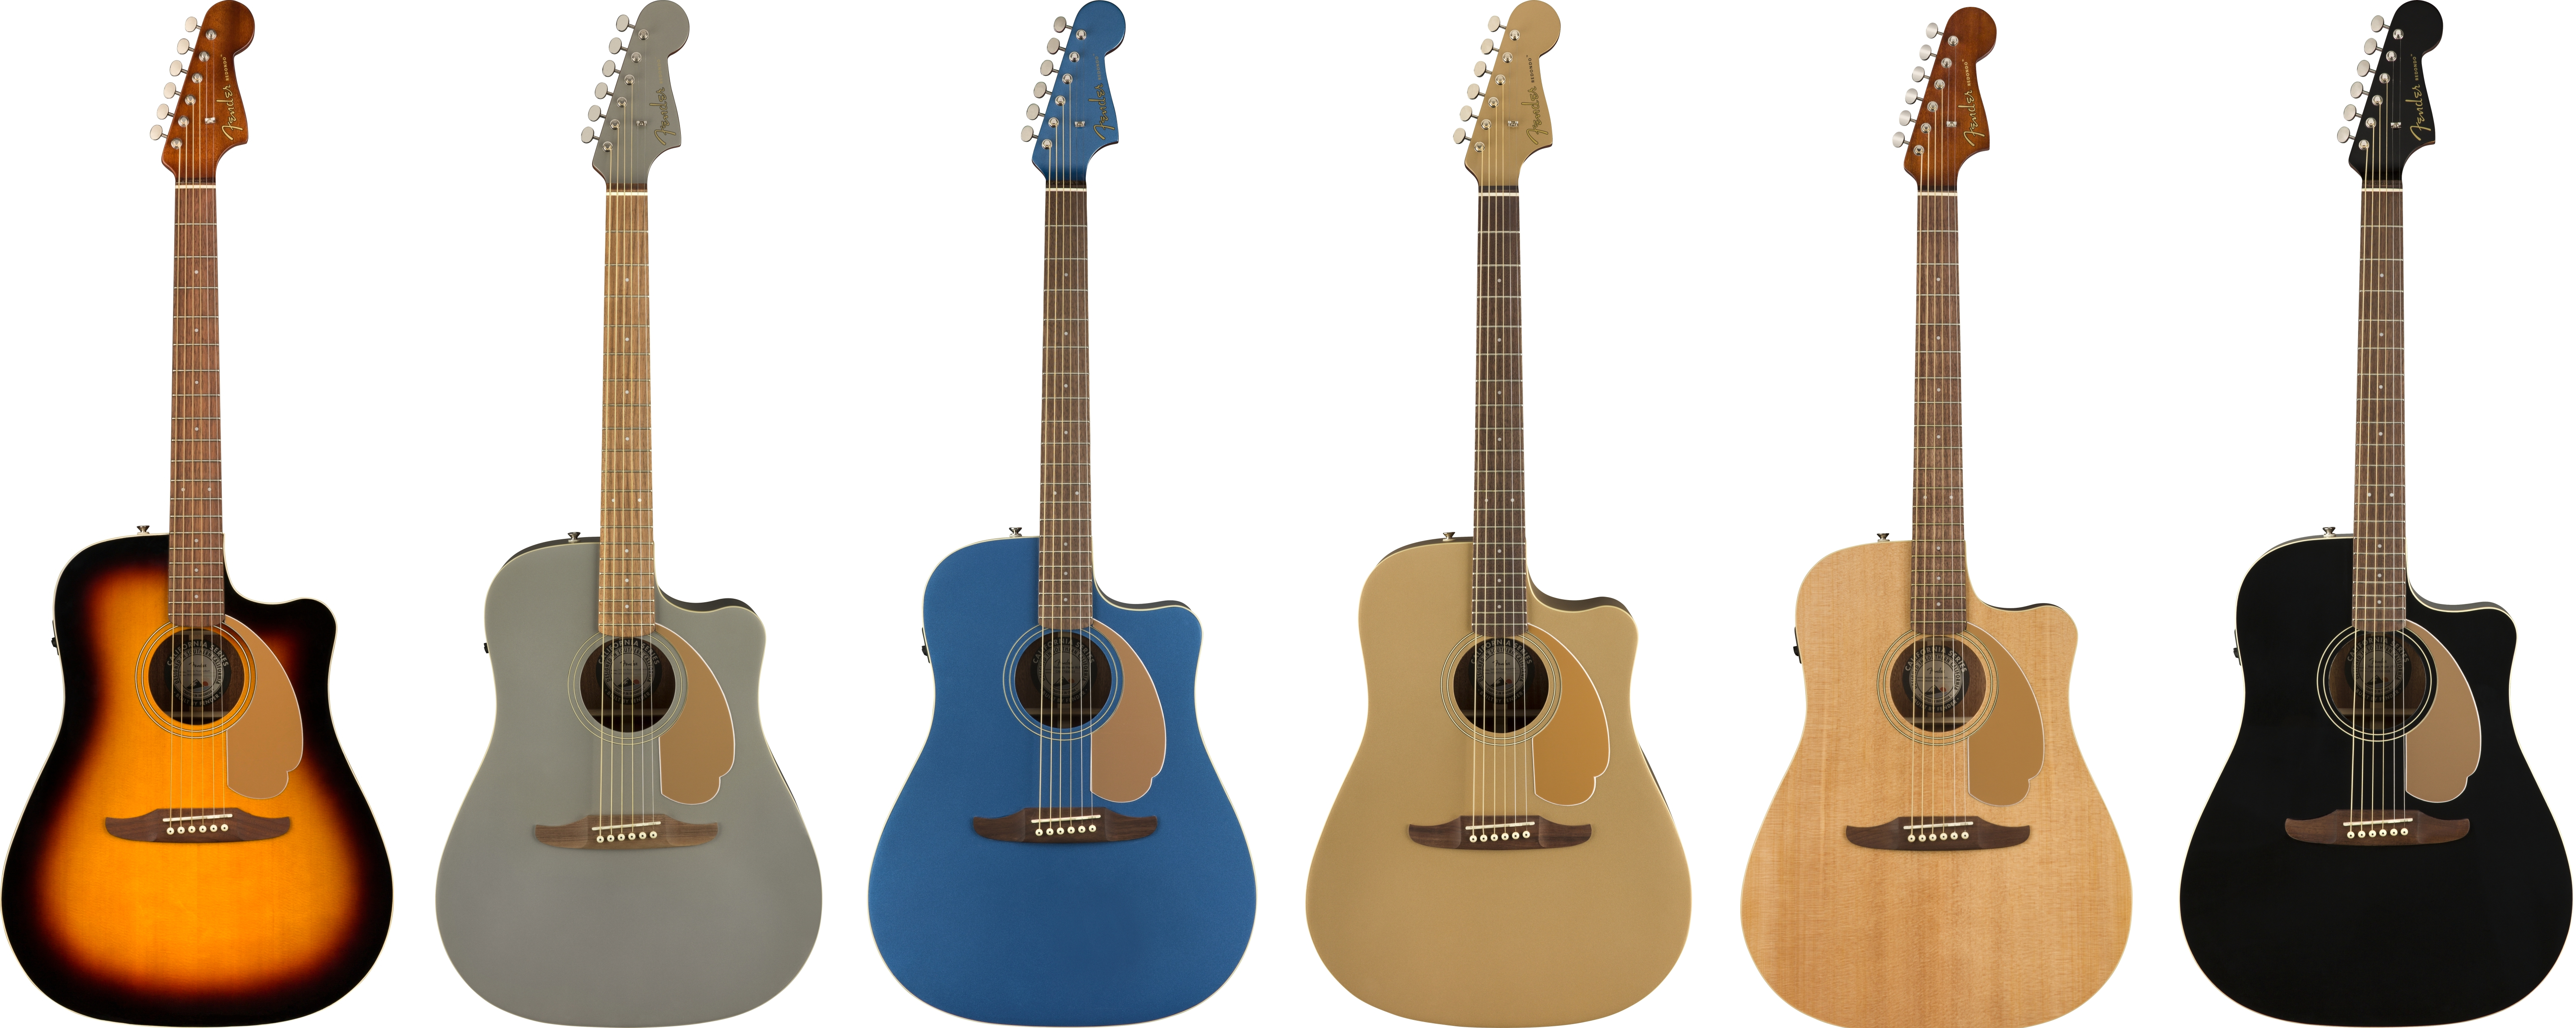 Fender Redondo Player colors available